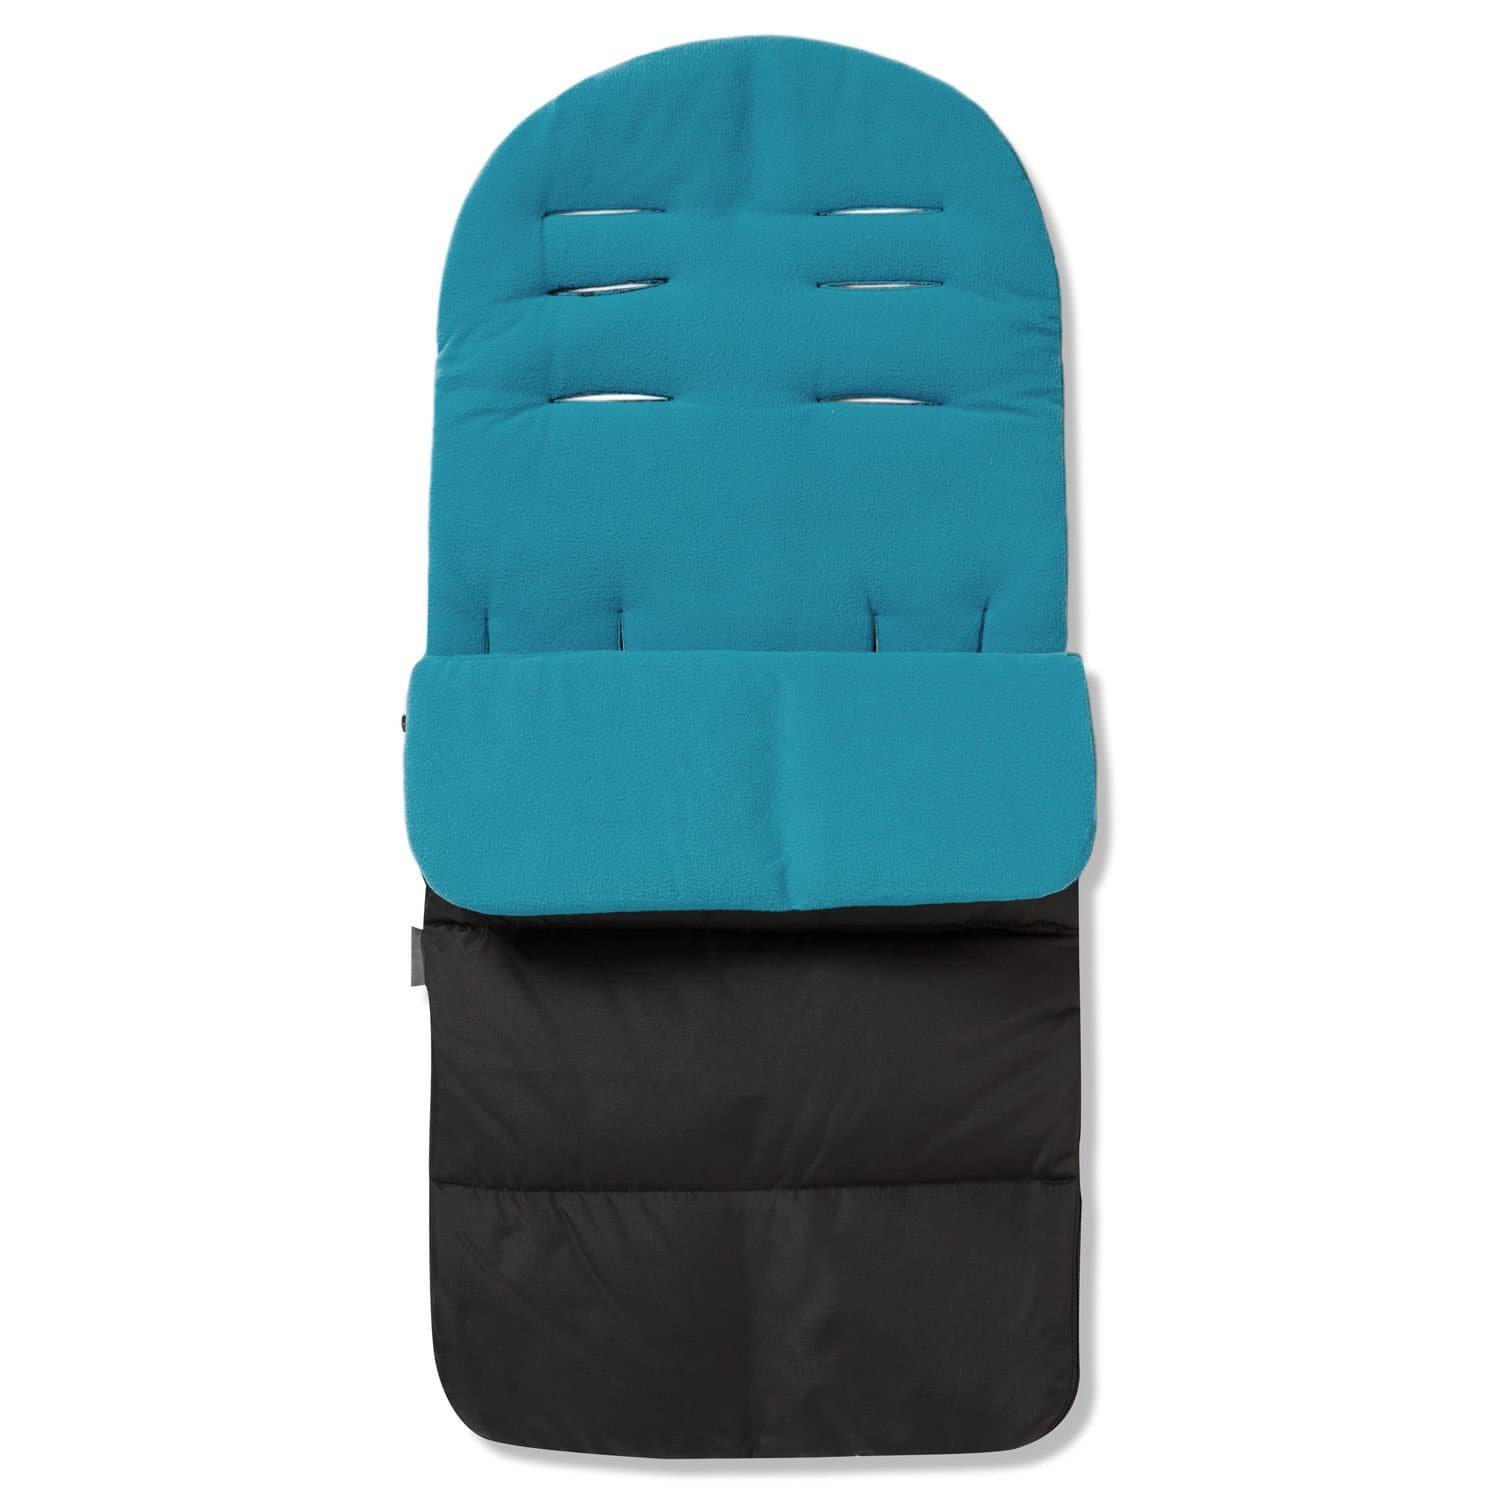 Premium Footmuff / Cosy Toes Compatible with Babybus - For Your Little One